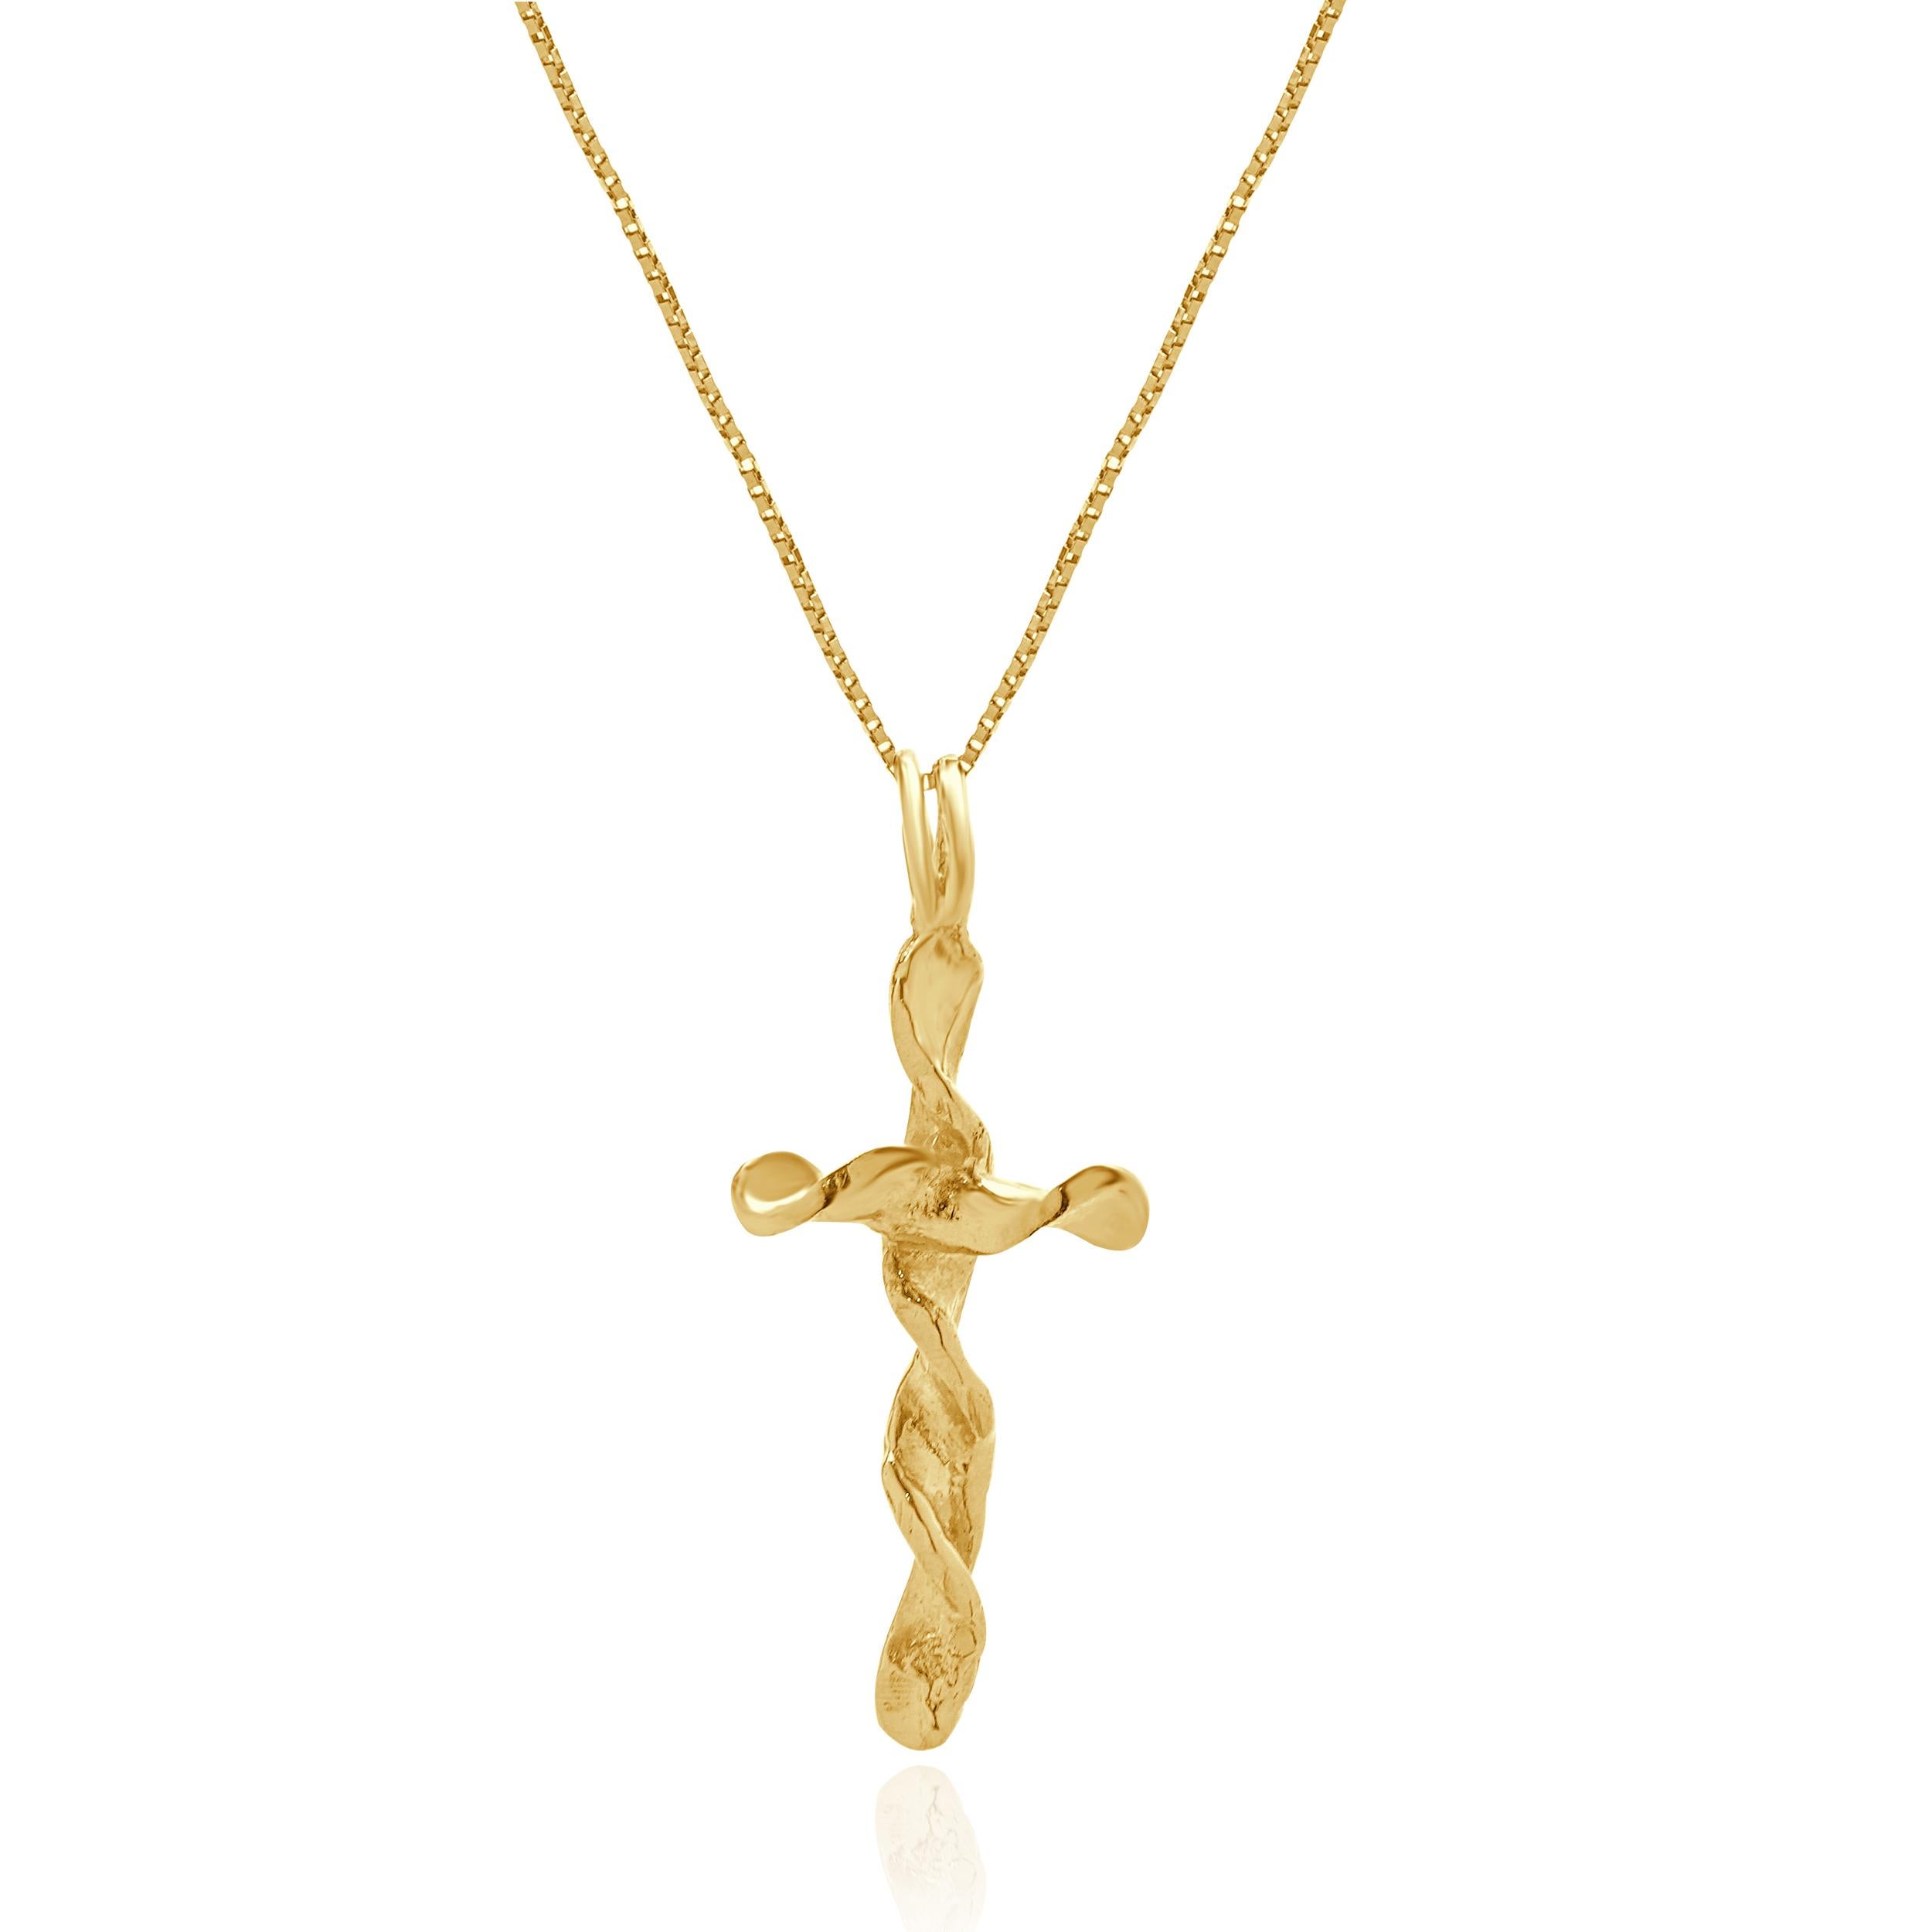 Designer: custom
Material: 14K yellow gold 
Dimensions: necklace measures 20-inches in length
Weight: 2.75 grams
